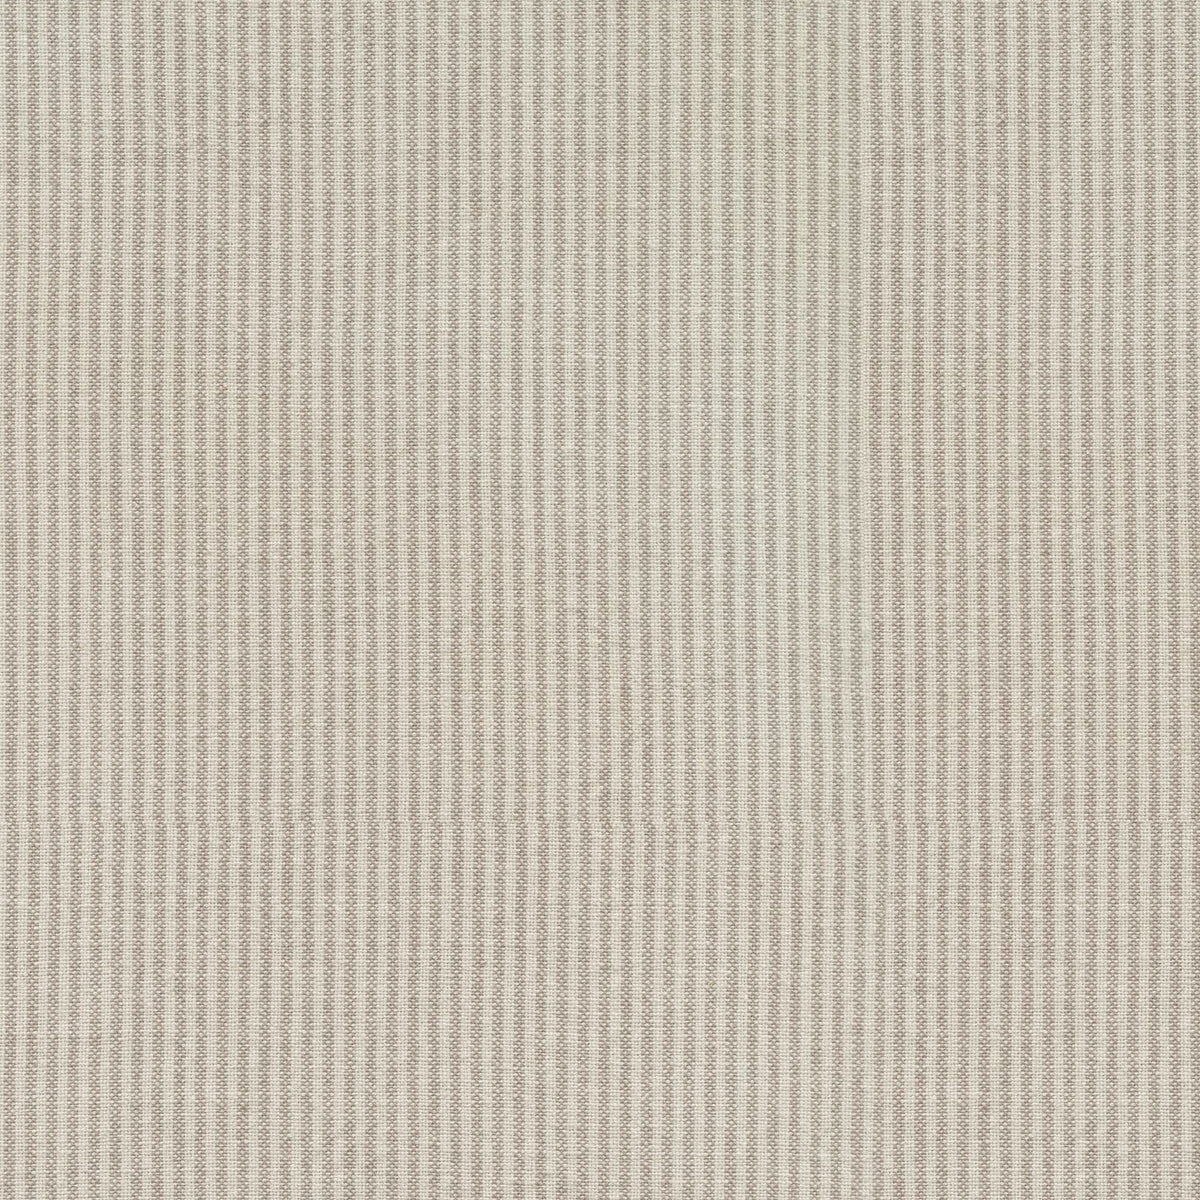 P/K Lifestyles Cullen Ticking - Thistle 410713 Fabric Swatch